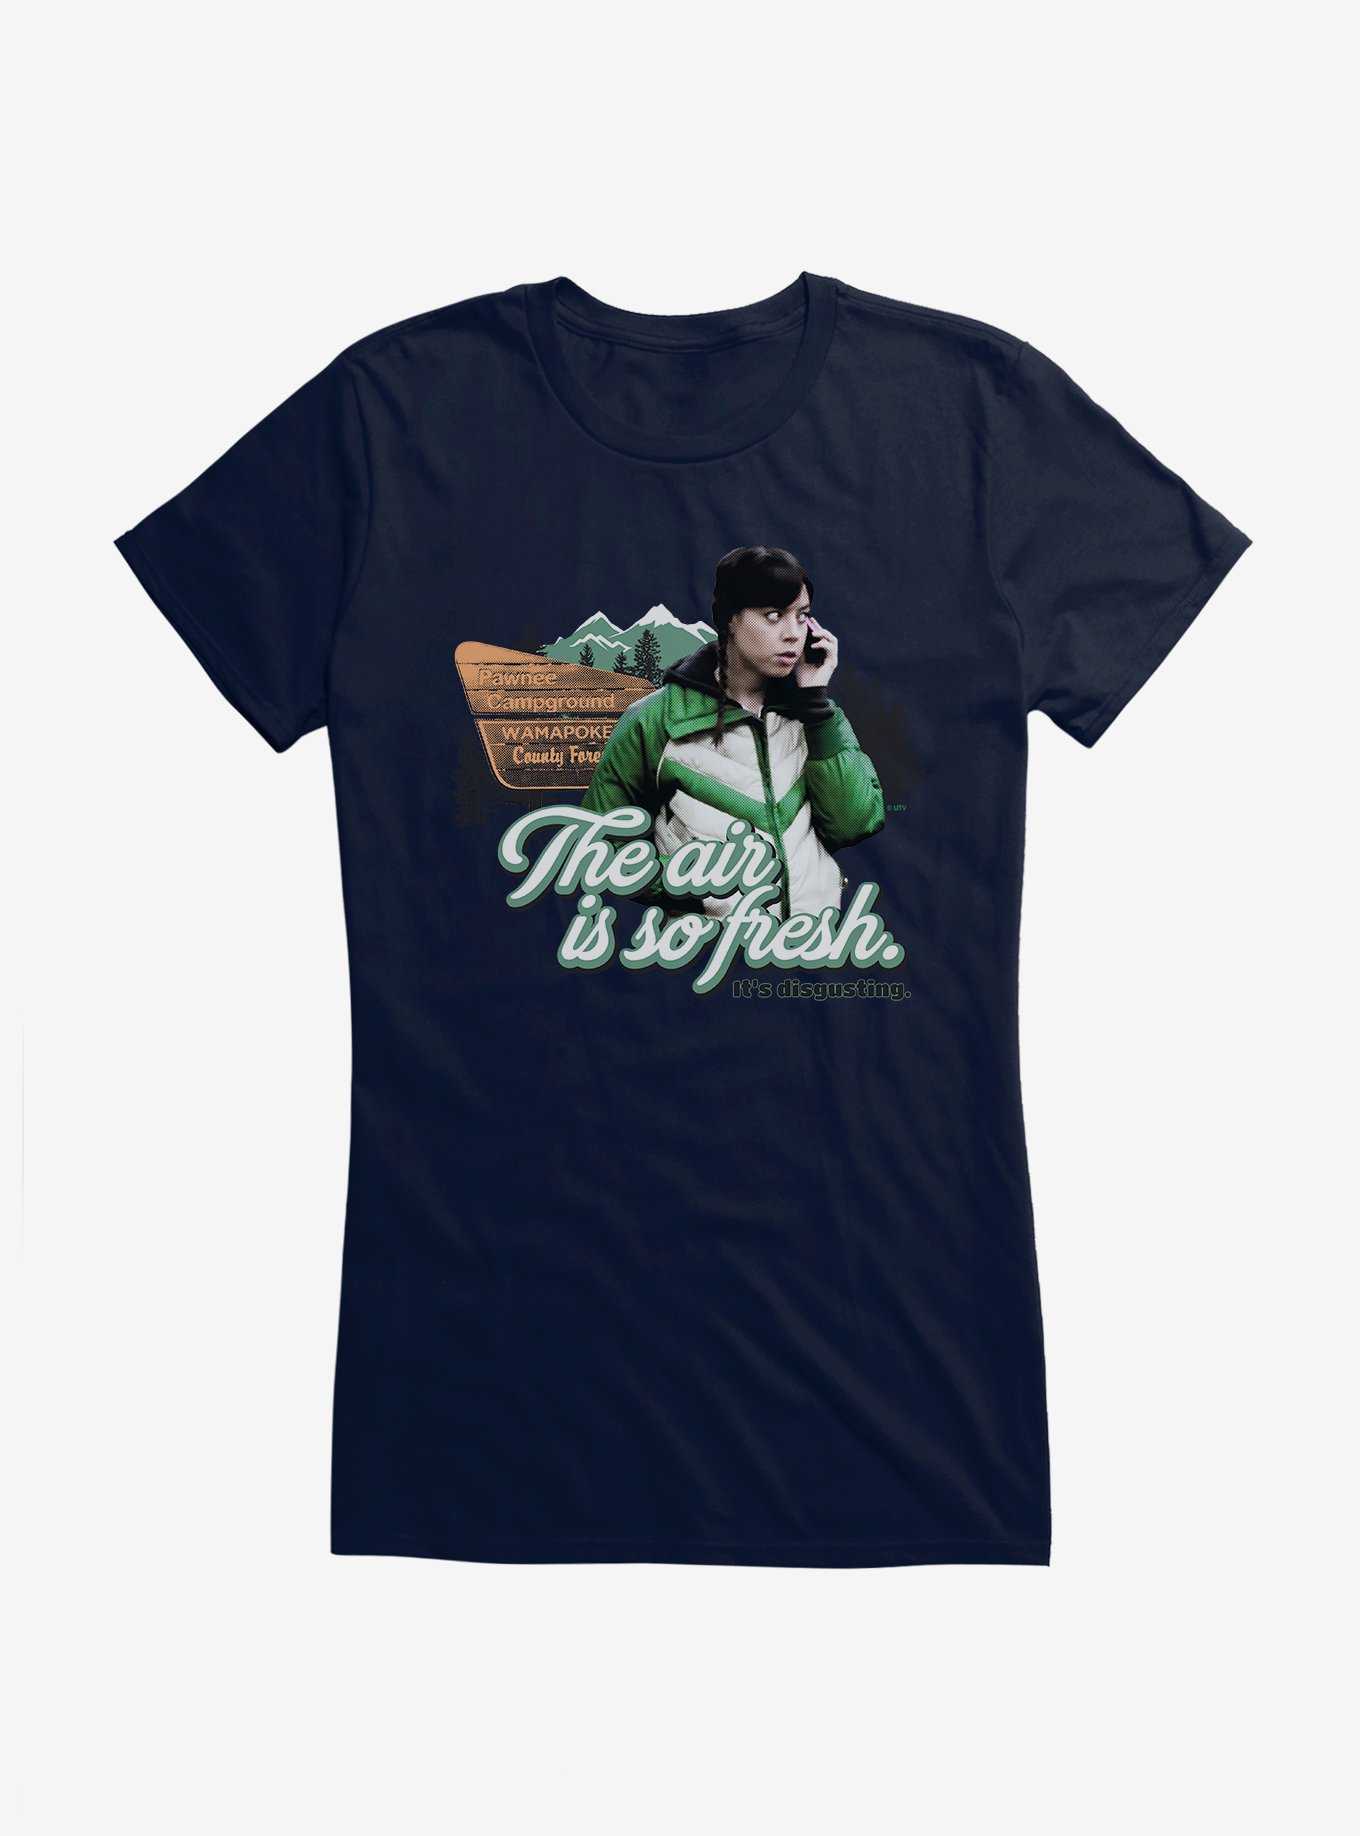 Parks And Recreation Fresh Air Disgusting Girls T-Shirt, , hi-res